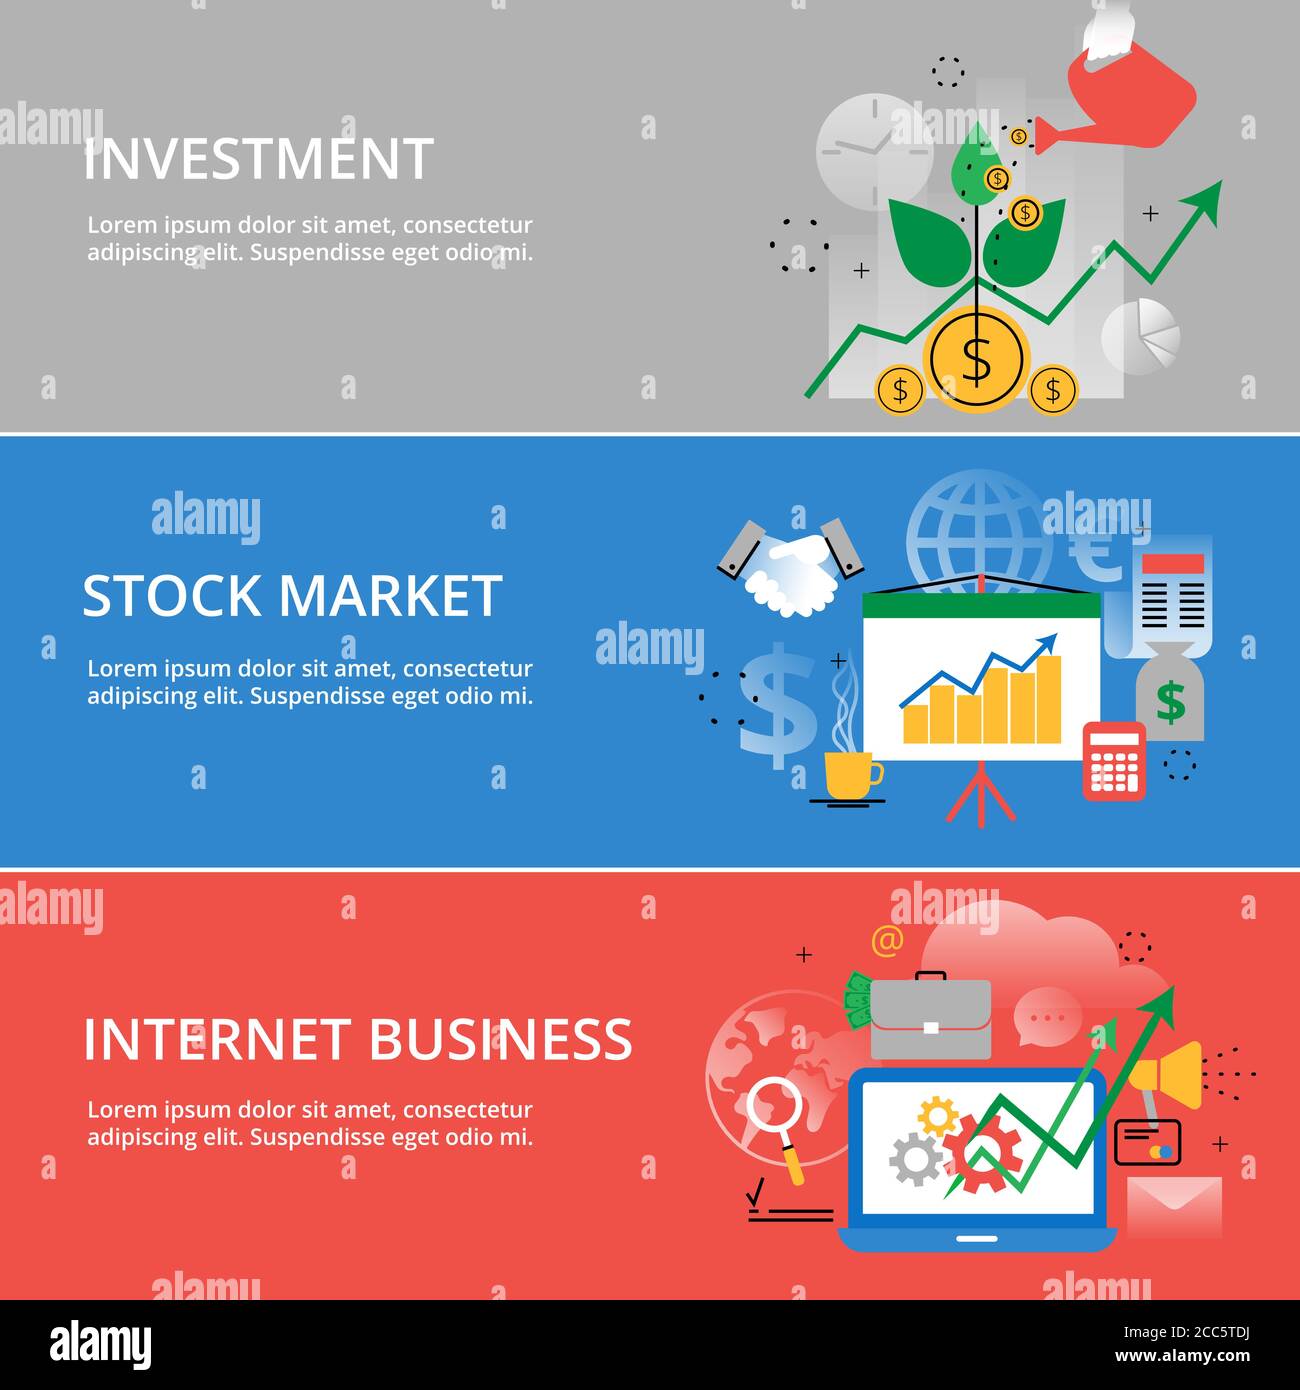 Modern flat thin line design vector illustration, infographic concept of investment process, stock market and internet business, for graphic and web d Stock Vector